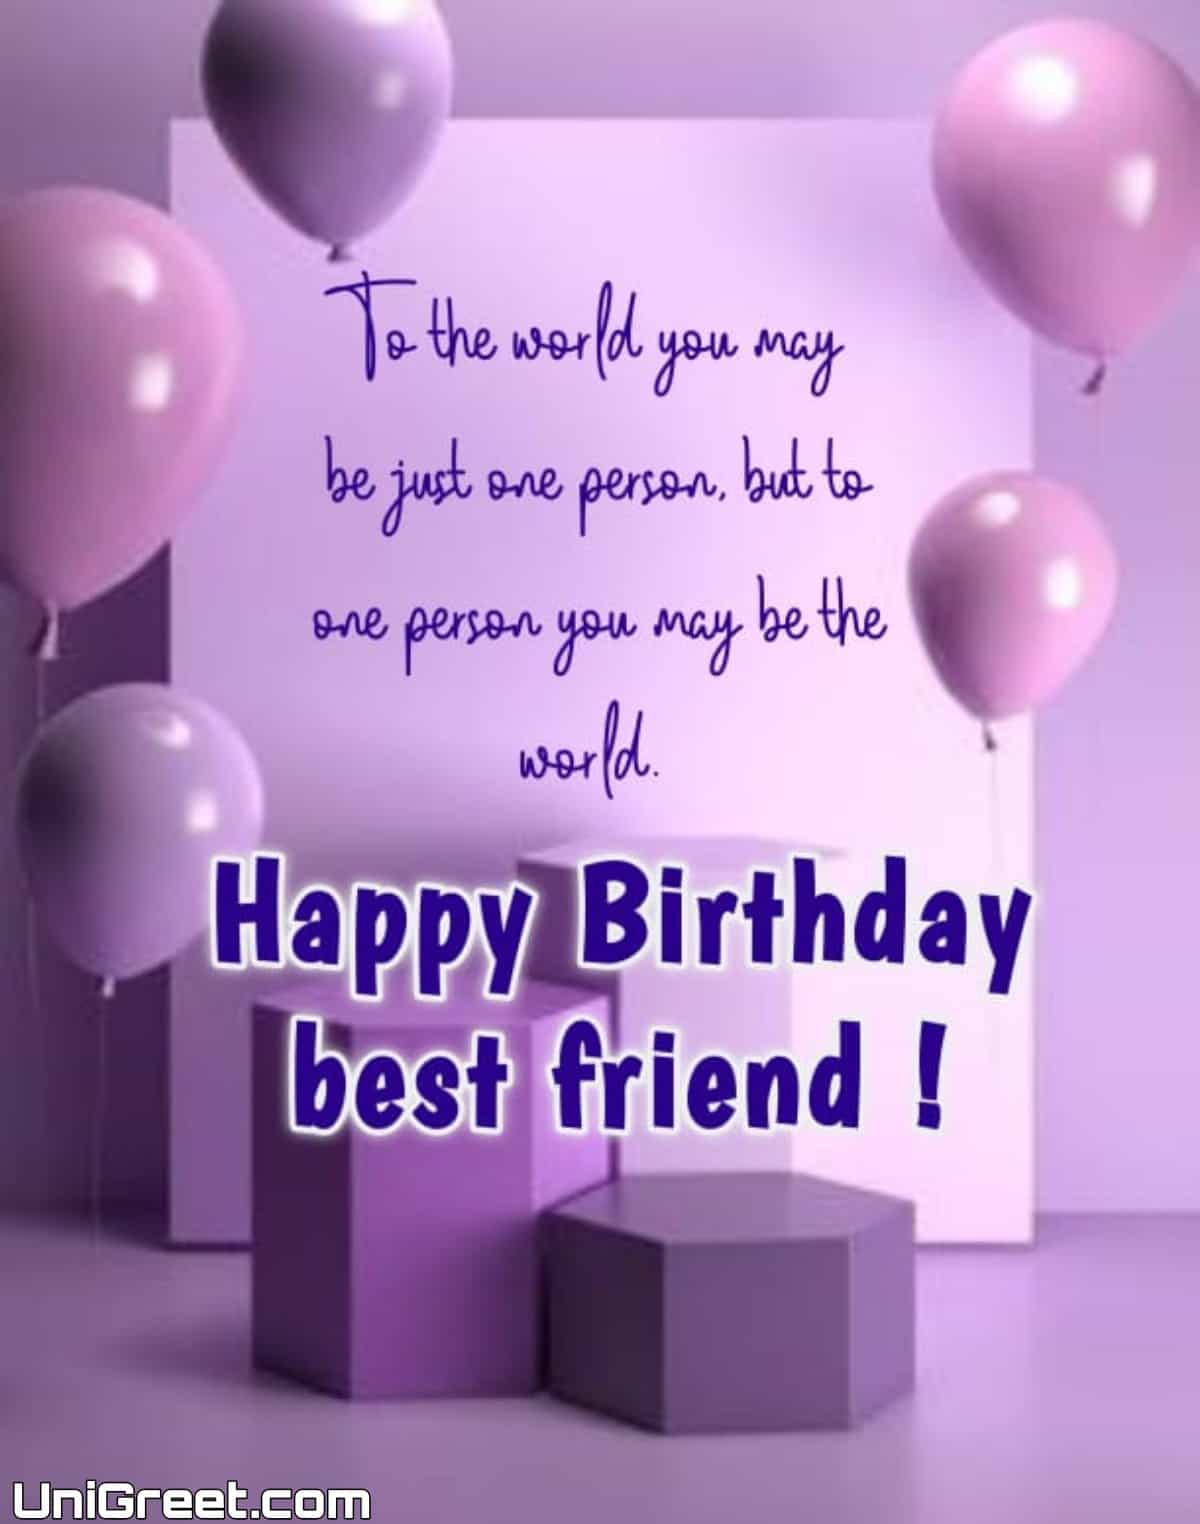 Beautiful Happy Birthday Friend Image Quotes Wishes HD Photo